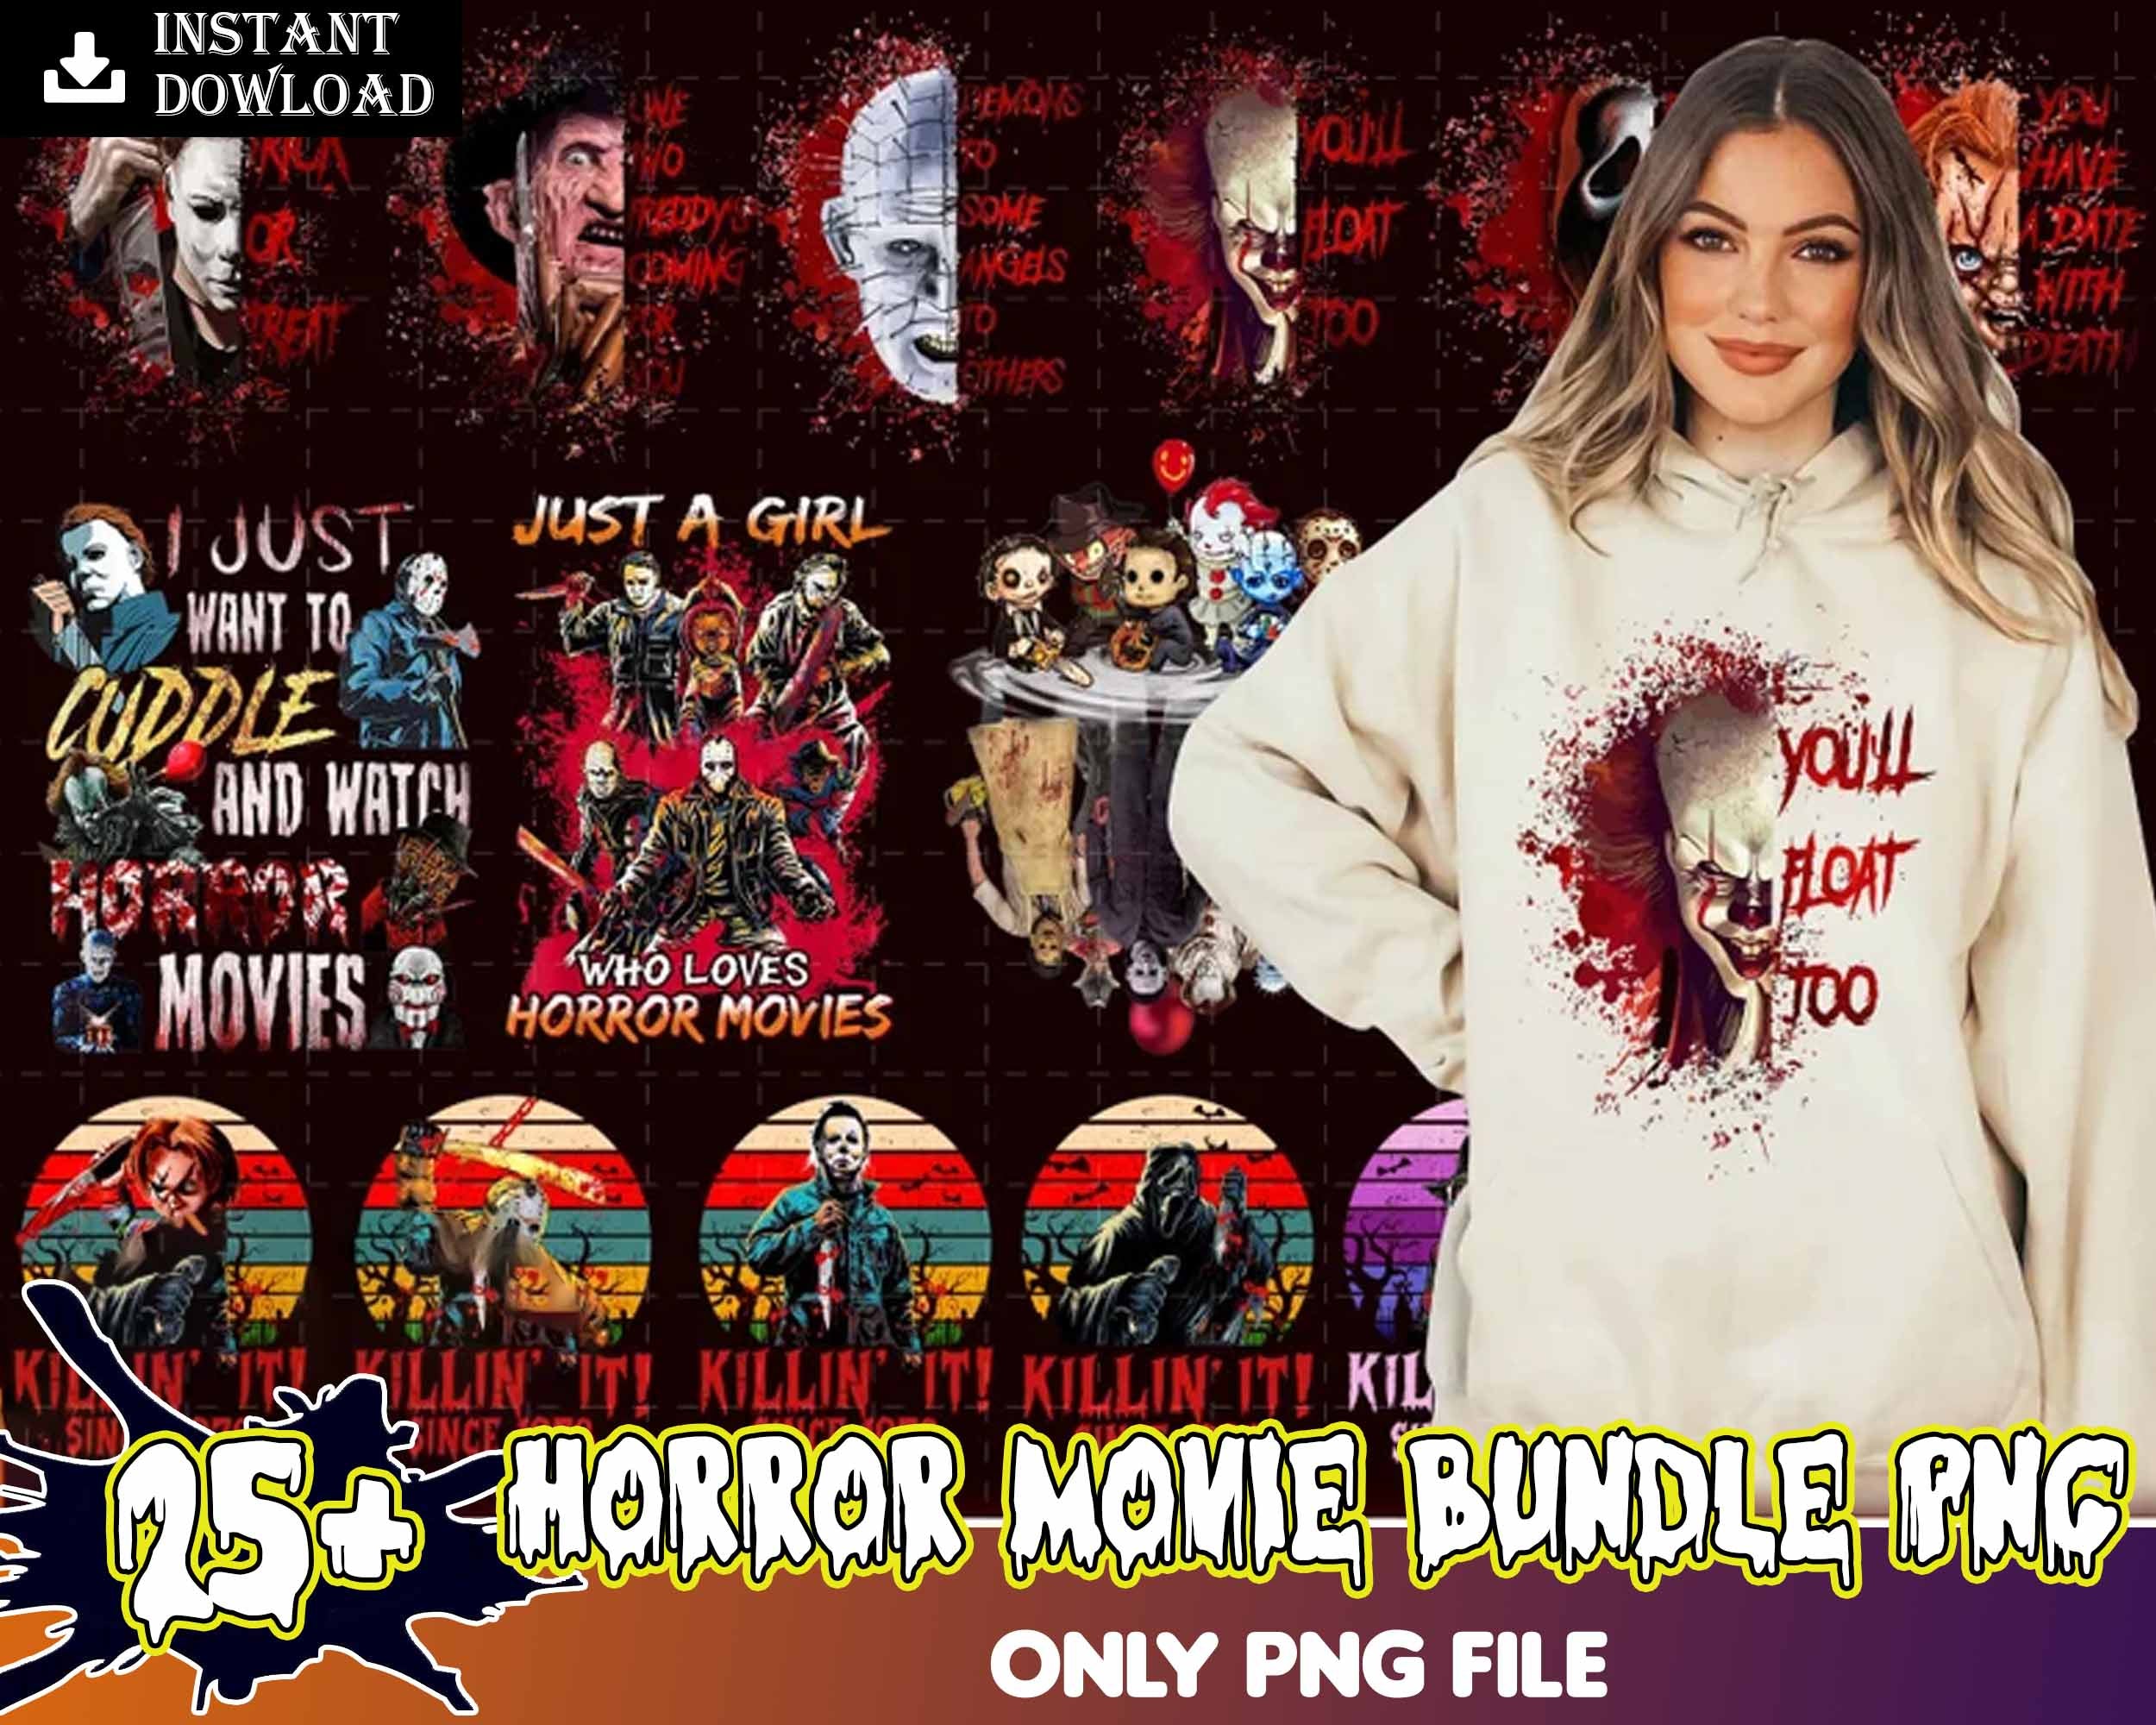 25+ Horror Movies Characters PNG Bundle, Halloween Bundle png files only, Digital download.